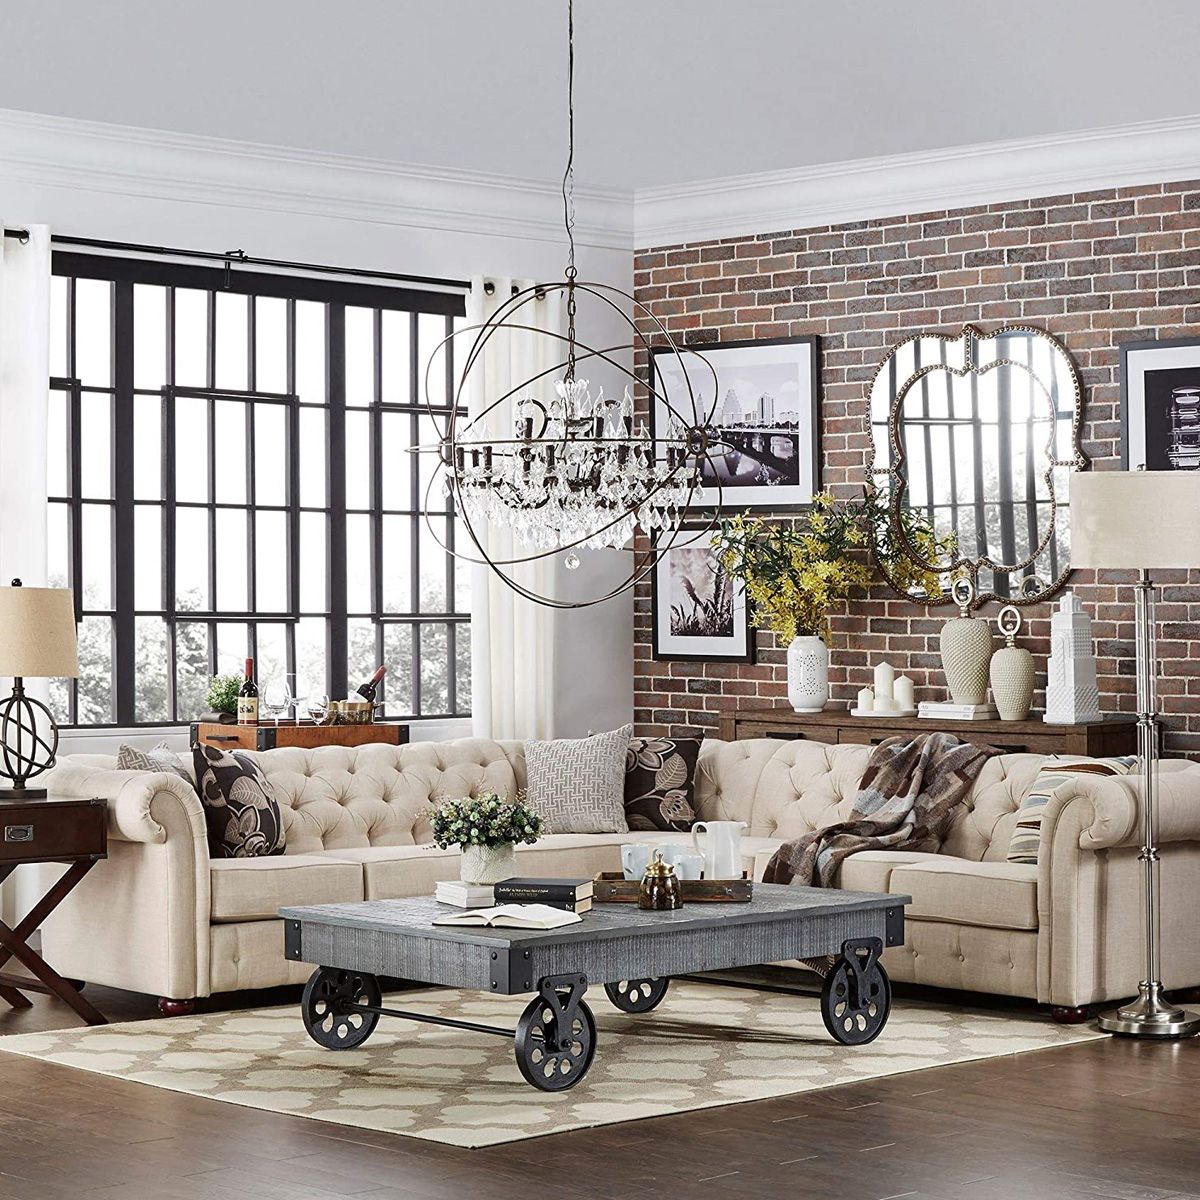 Tufted Scroll Arm Chesterfield 7 Seat L Shaped Sectional Sofa In Beige  Color From Aed 5849 | Atoz Furniture Within Beige L Shaped Sectional Sofas (View 14 of 15)